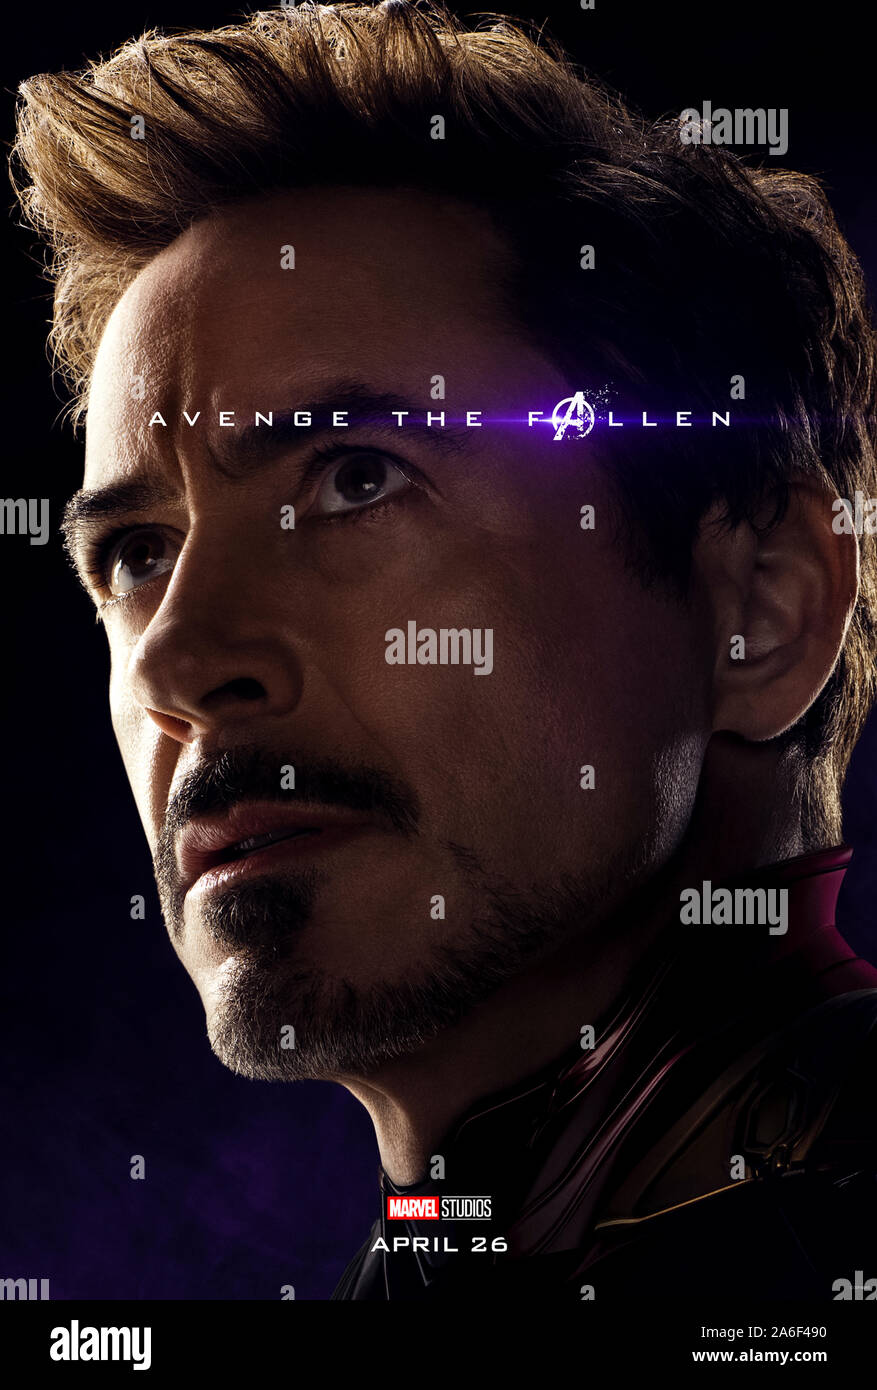 Character advance poster for Avengers: Endgame (2019) directed  by Anthony and Joe Russo starring Robert Downey Jr. as Tony Stark / Iron Man. The epic conclusion and 22nd film in the Marvel Cinematic Universe. Stock Photo